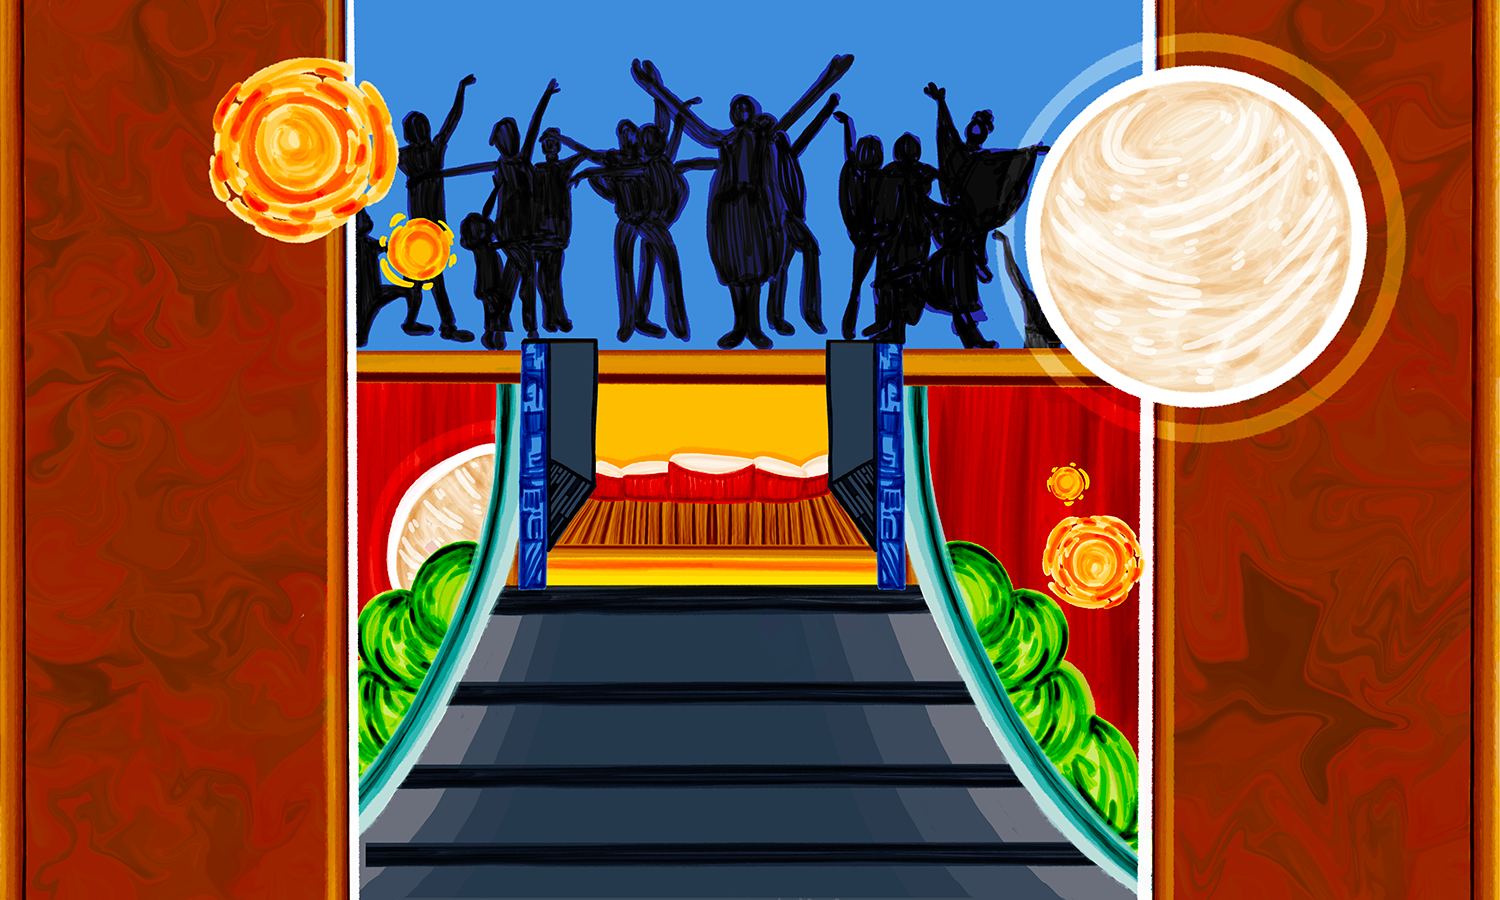 Illustration of people dancing on a stage with stairs leading up to it.